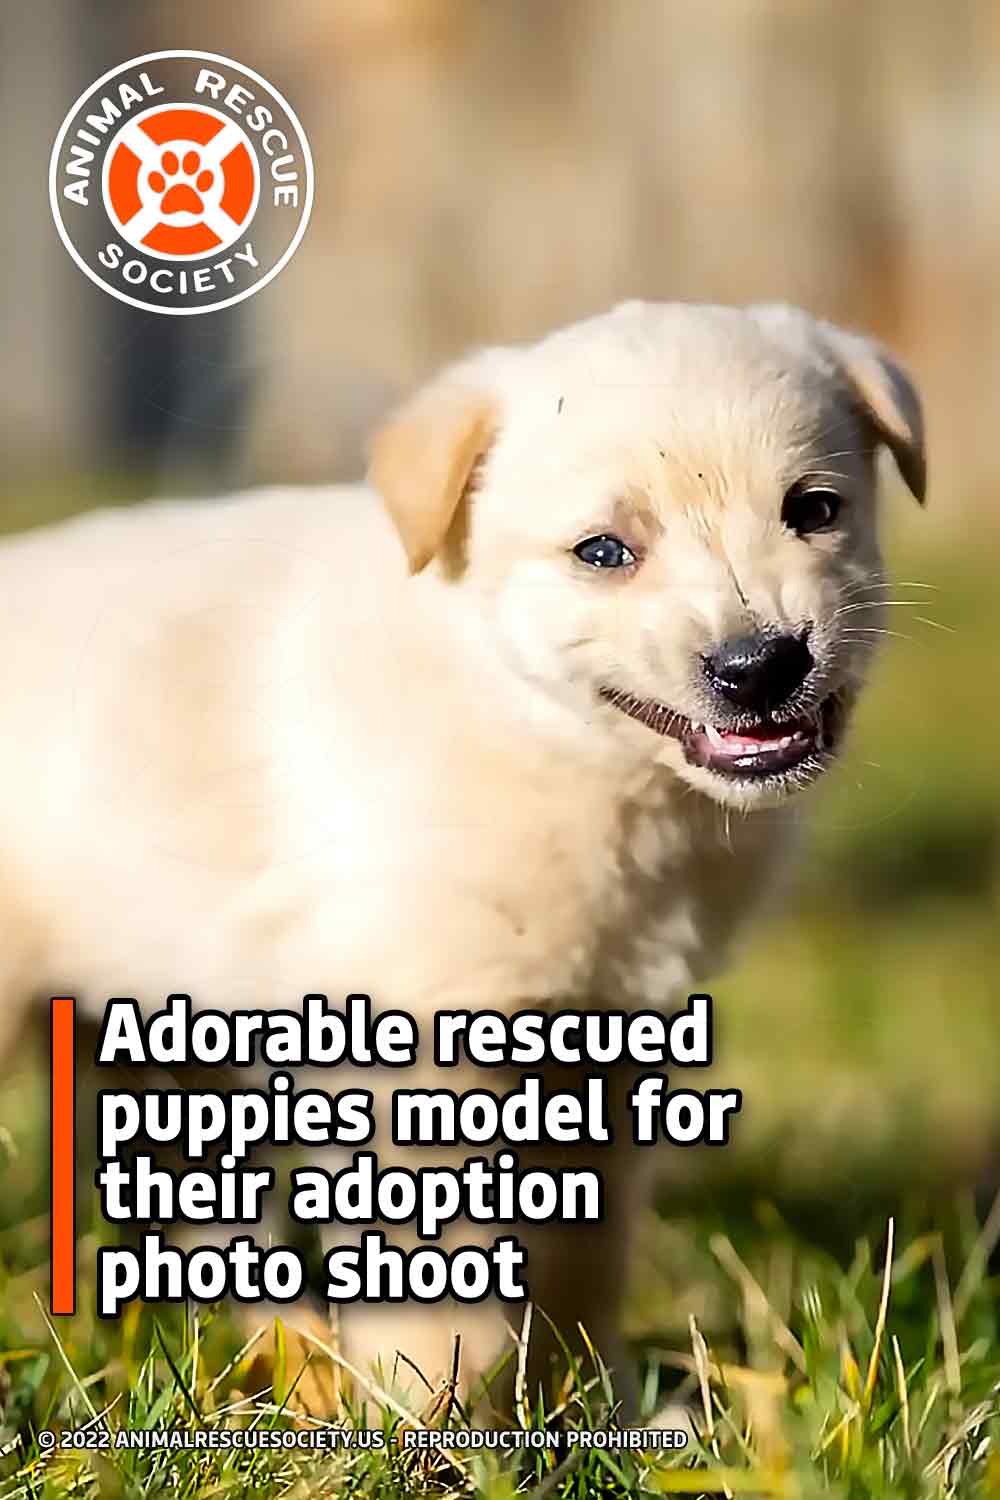 Adorable rescued puppies model for their adoption photo shoot